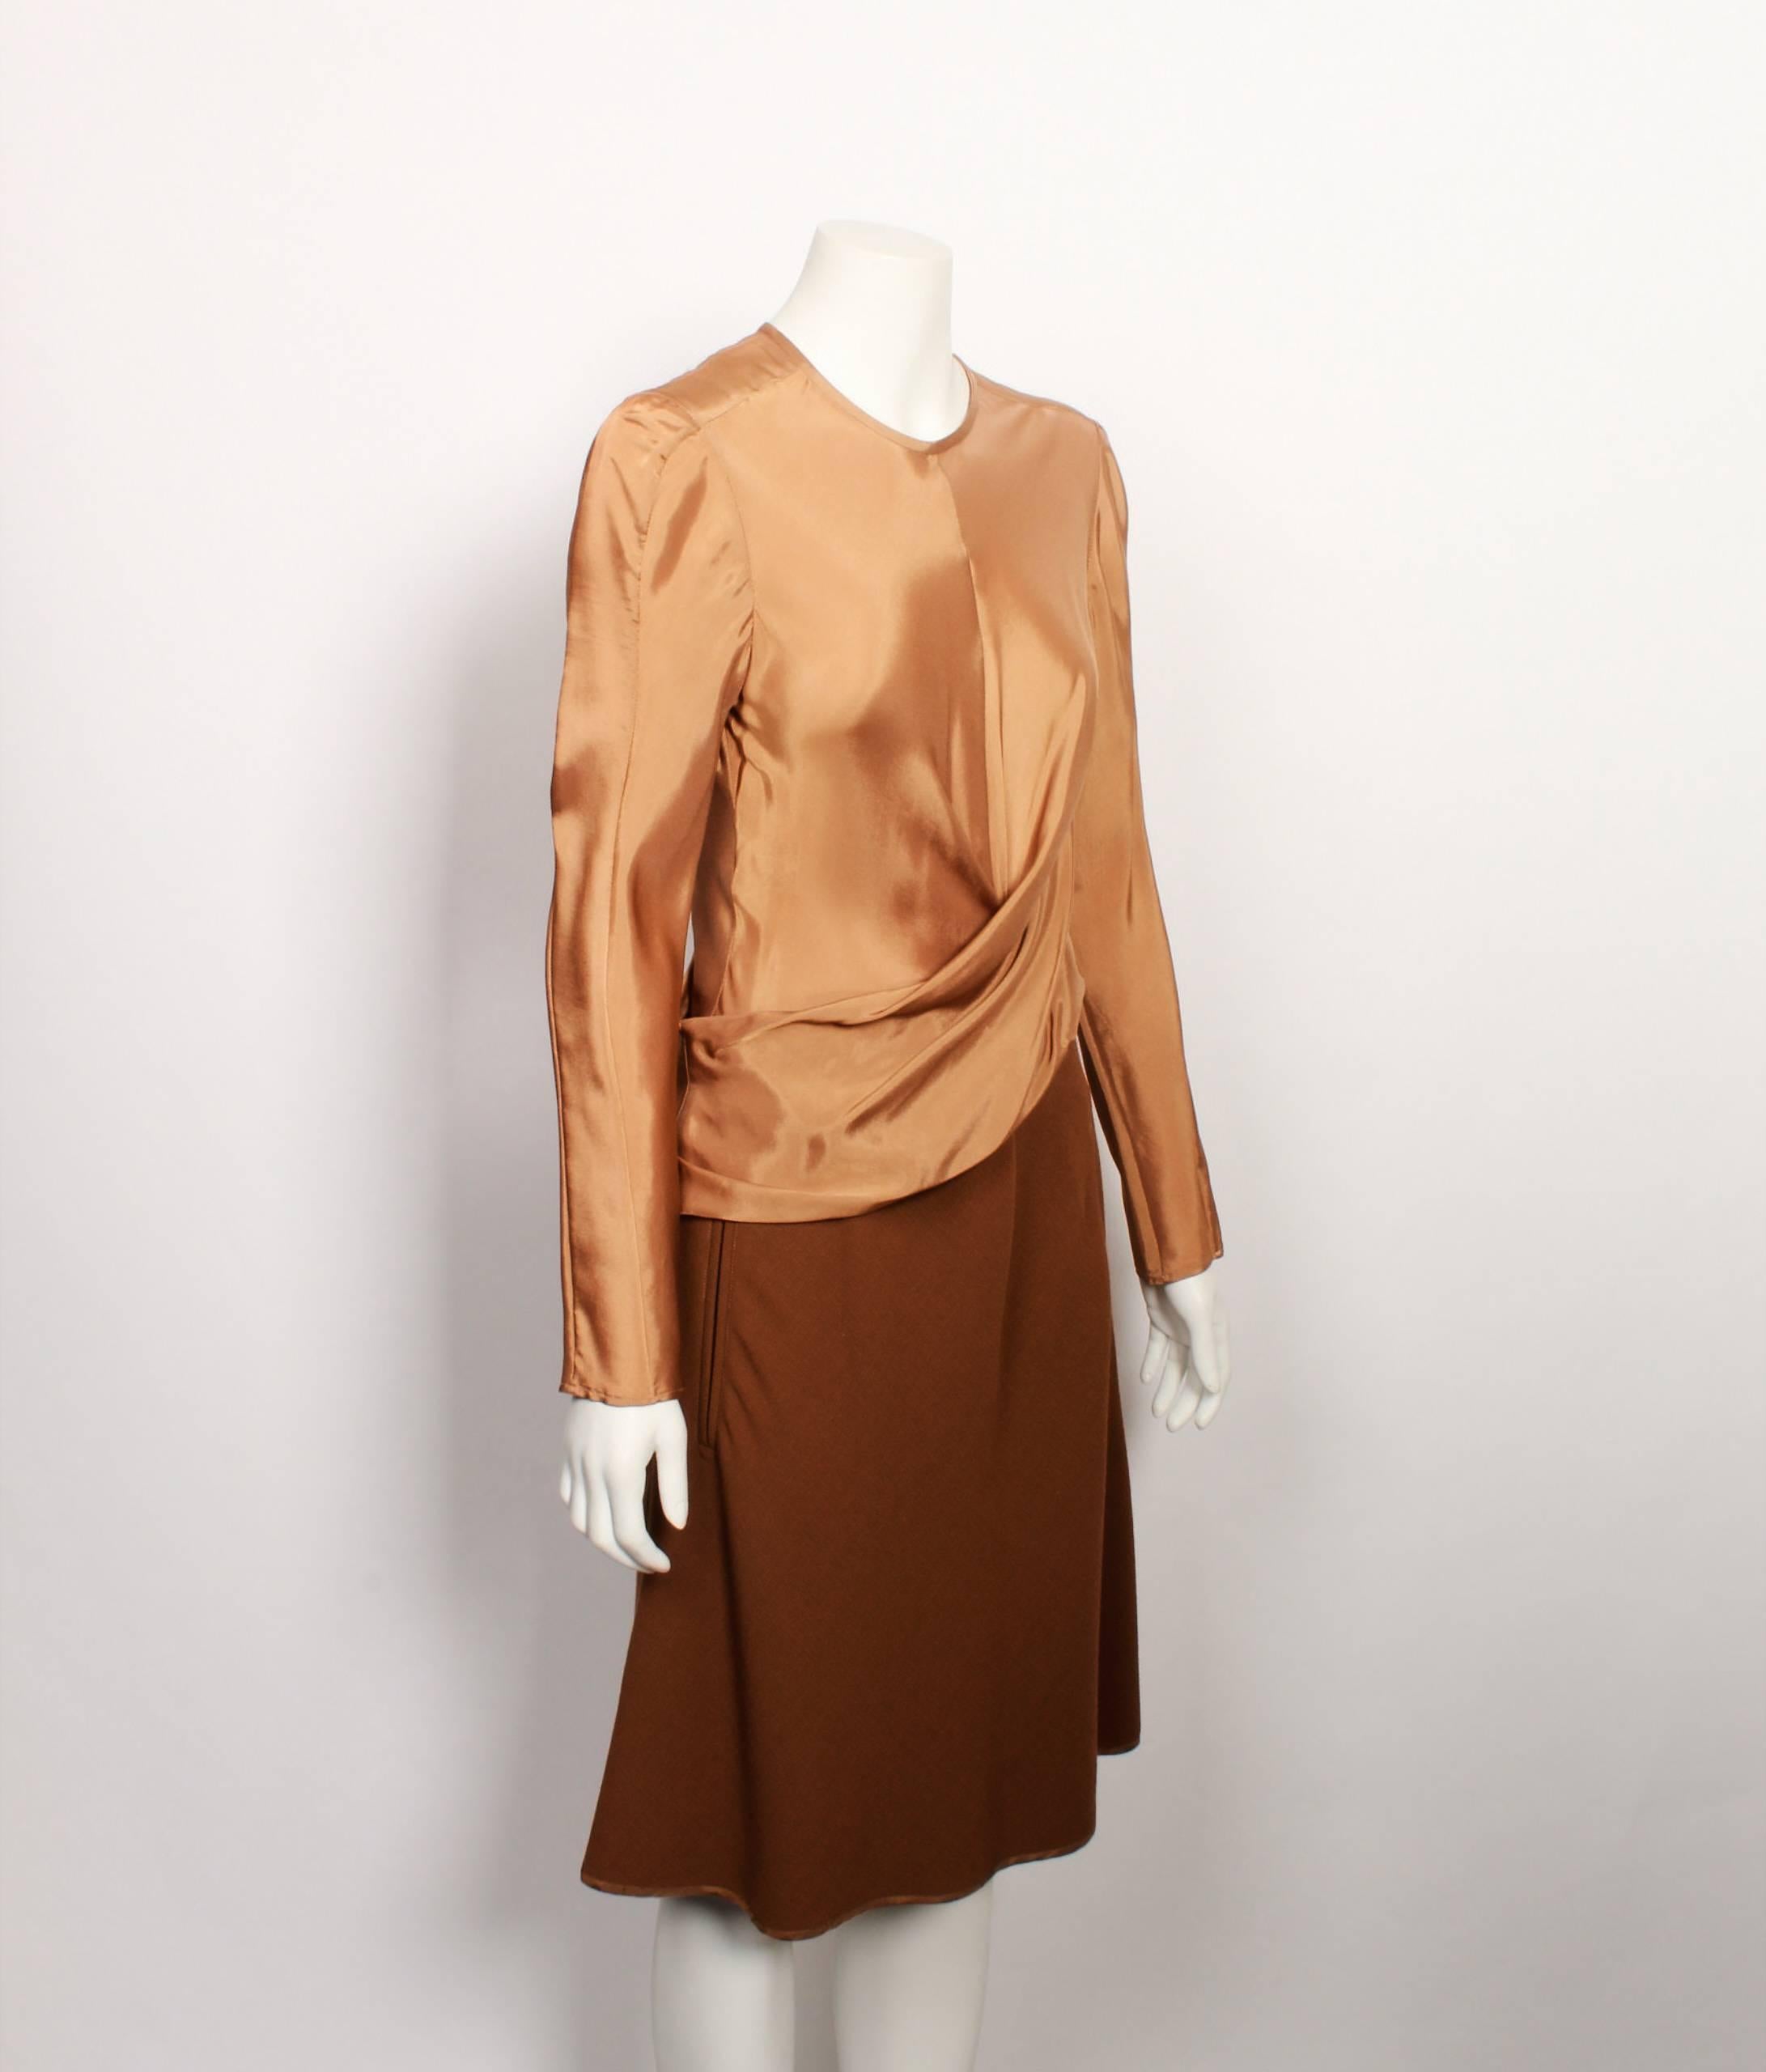 Carven long sleeved dress featured draped asymmetric bodice in matte satin. The skirt section of the dress is made from matte wool in tonal shades of caramel. 
The bodice has a fitted silhouette and the hemline is flared. Features two welt pockets